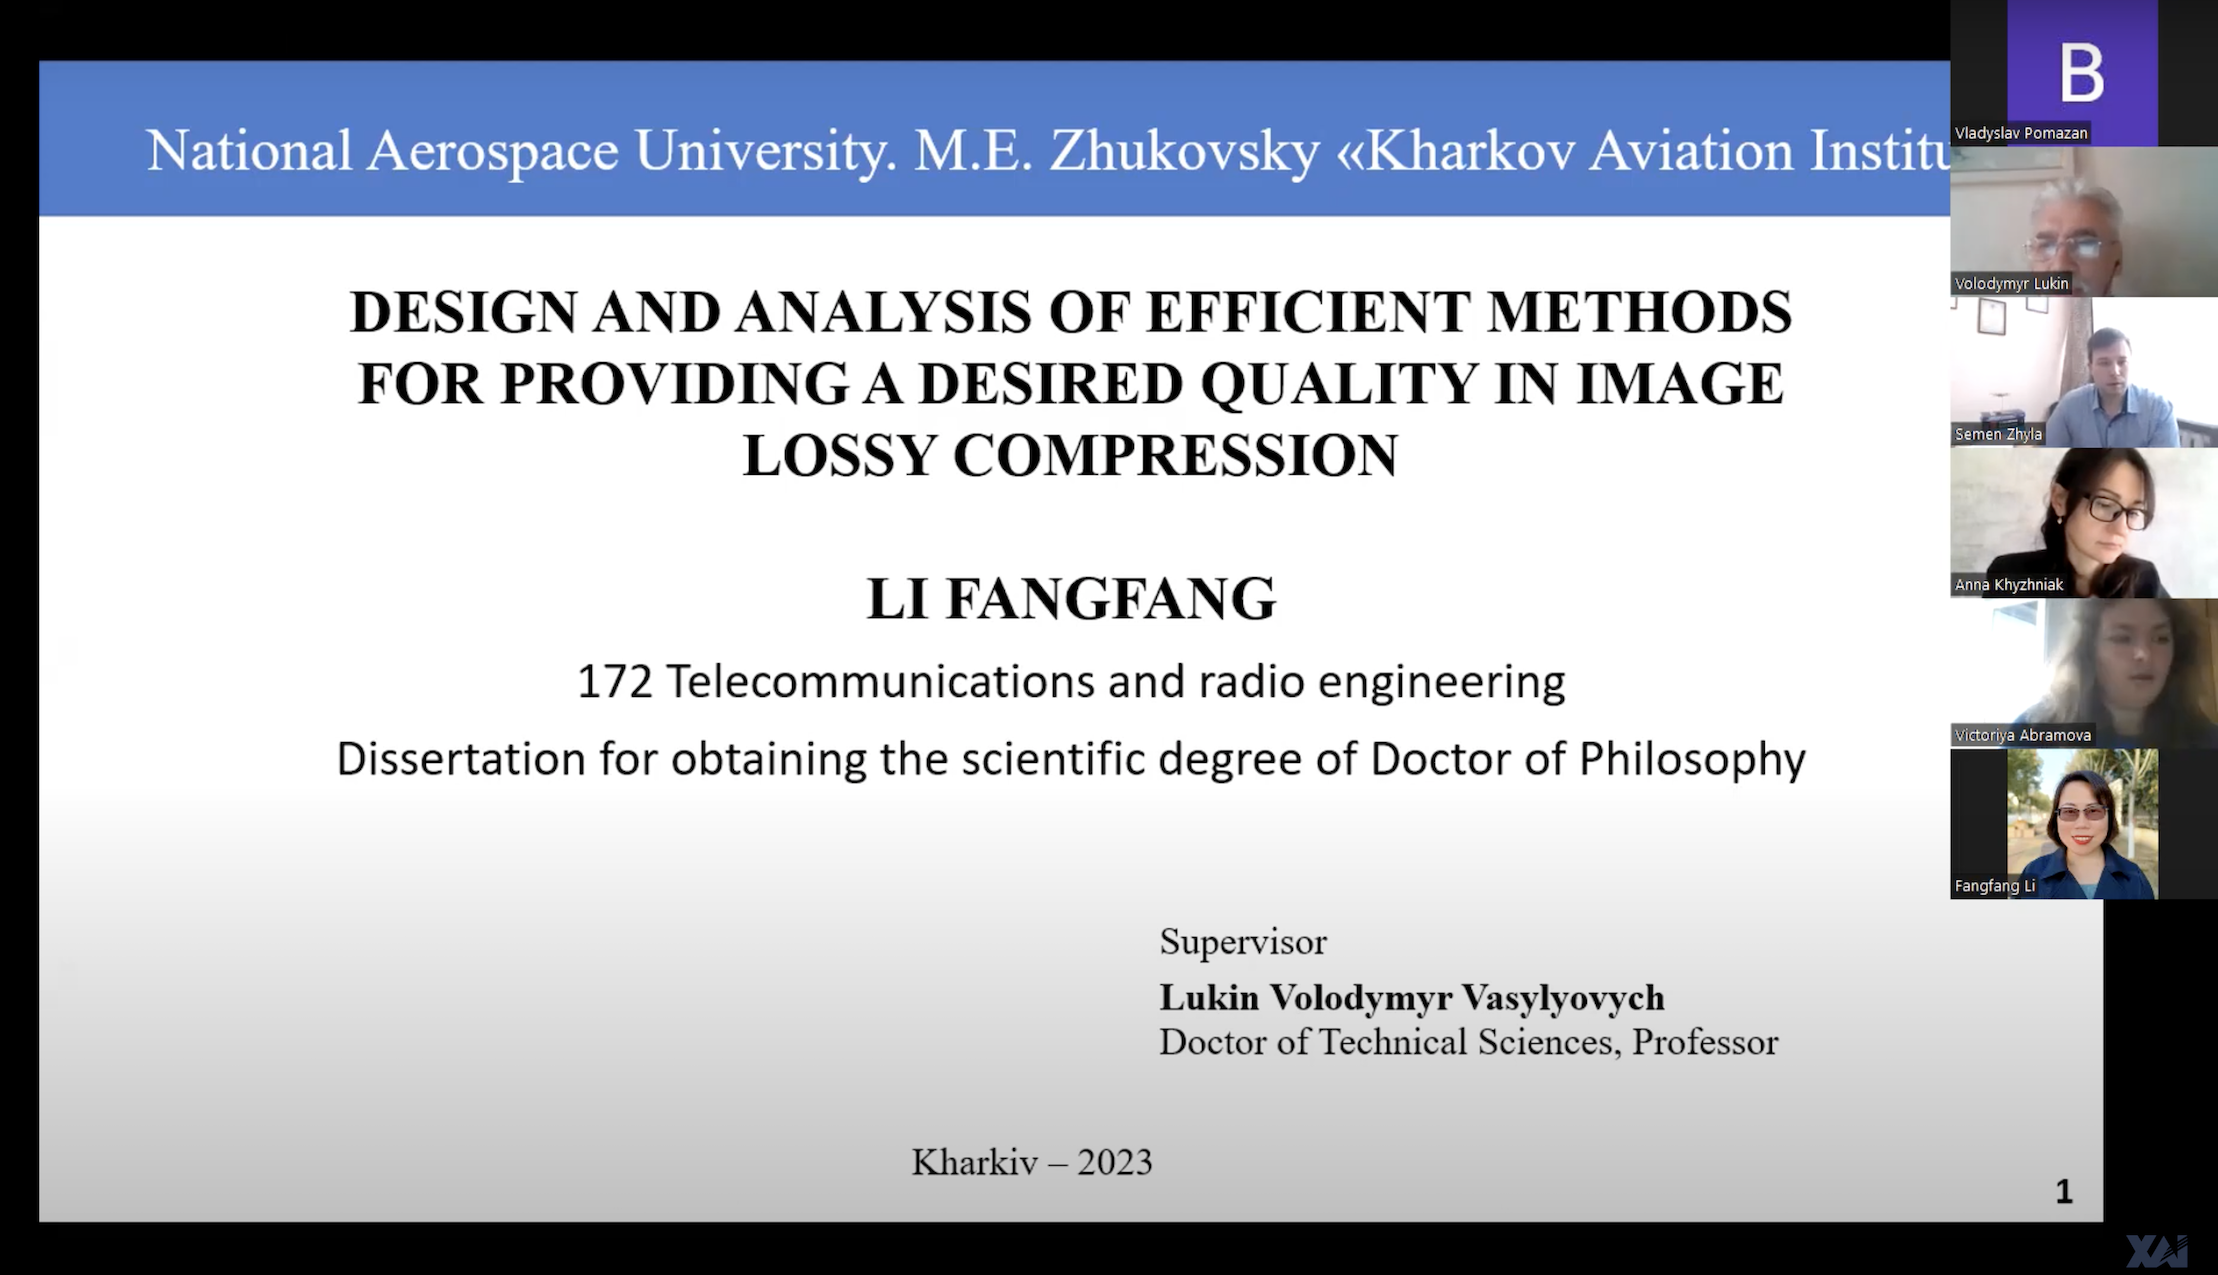 the public defense of Li Fangfang's dissertation on the topic "Design and analysis of efficient methods for providing a desired quality in image lossy compression"